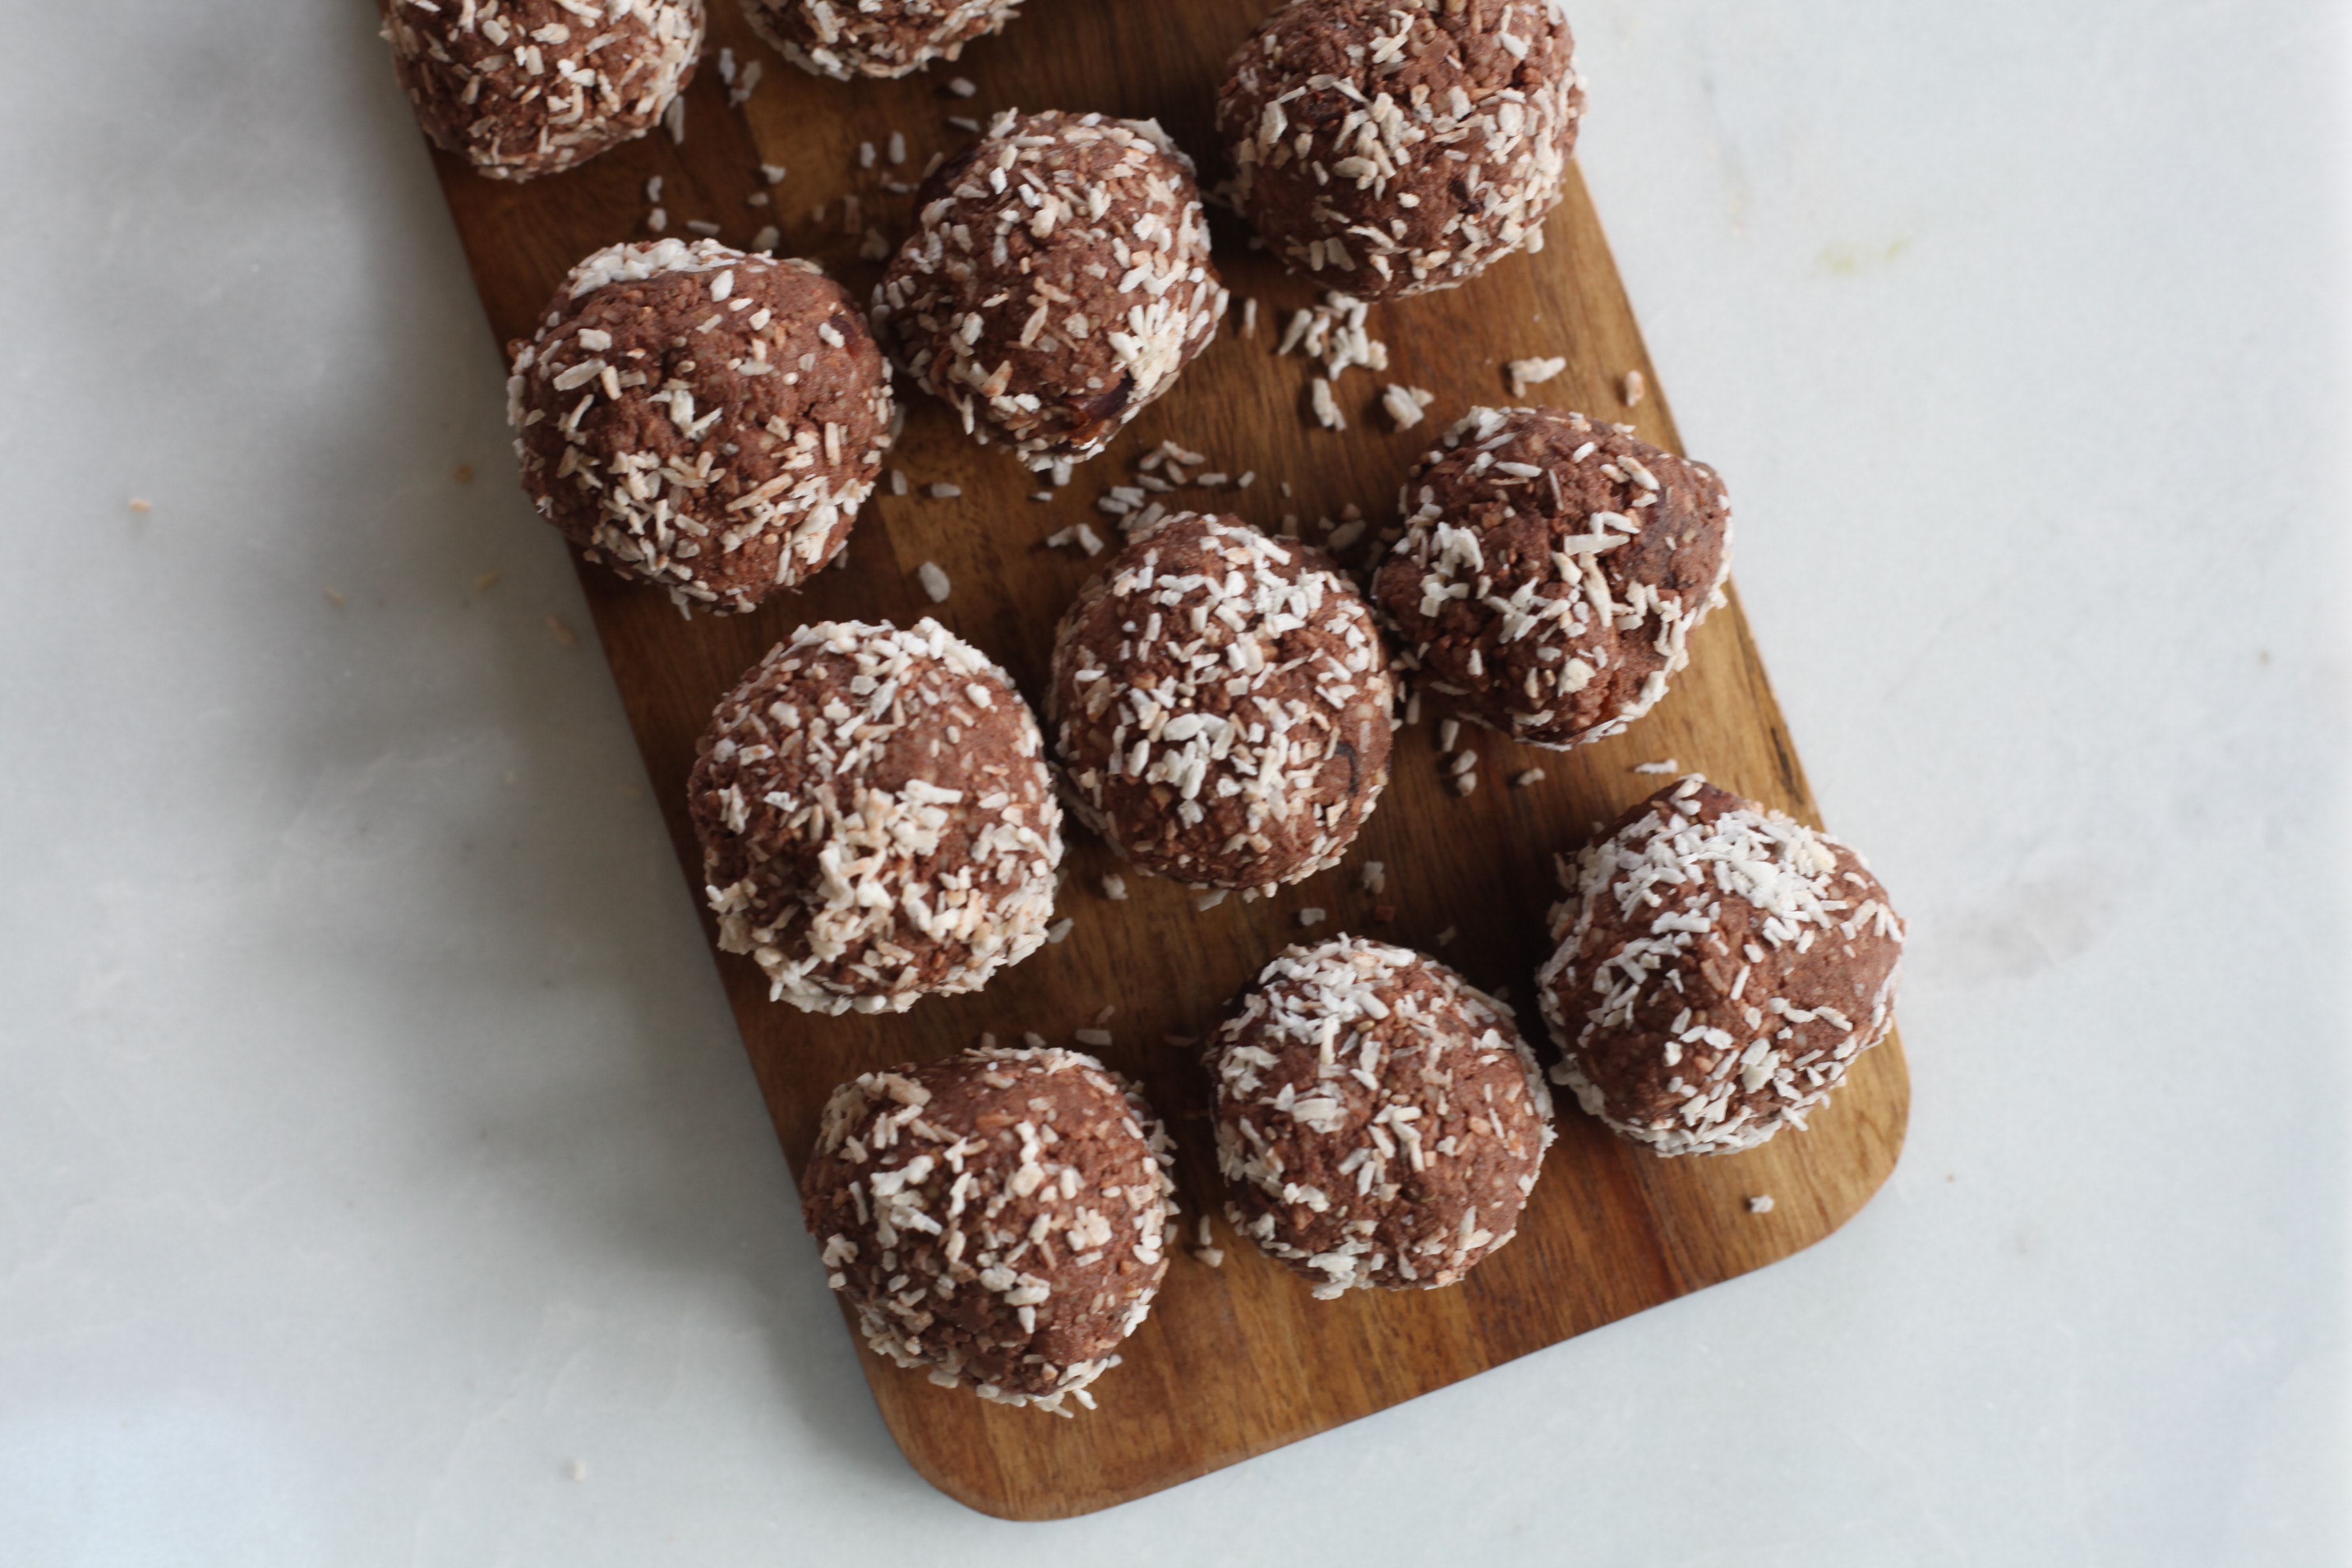 Weekly Tip - Chocolate protein balls